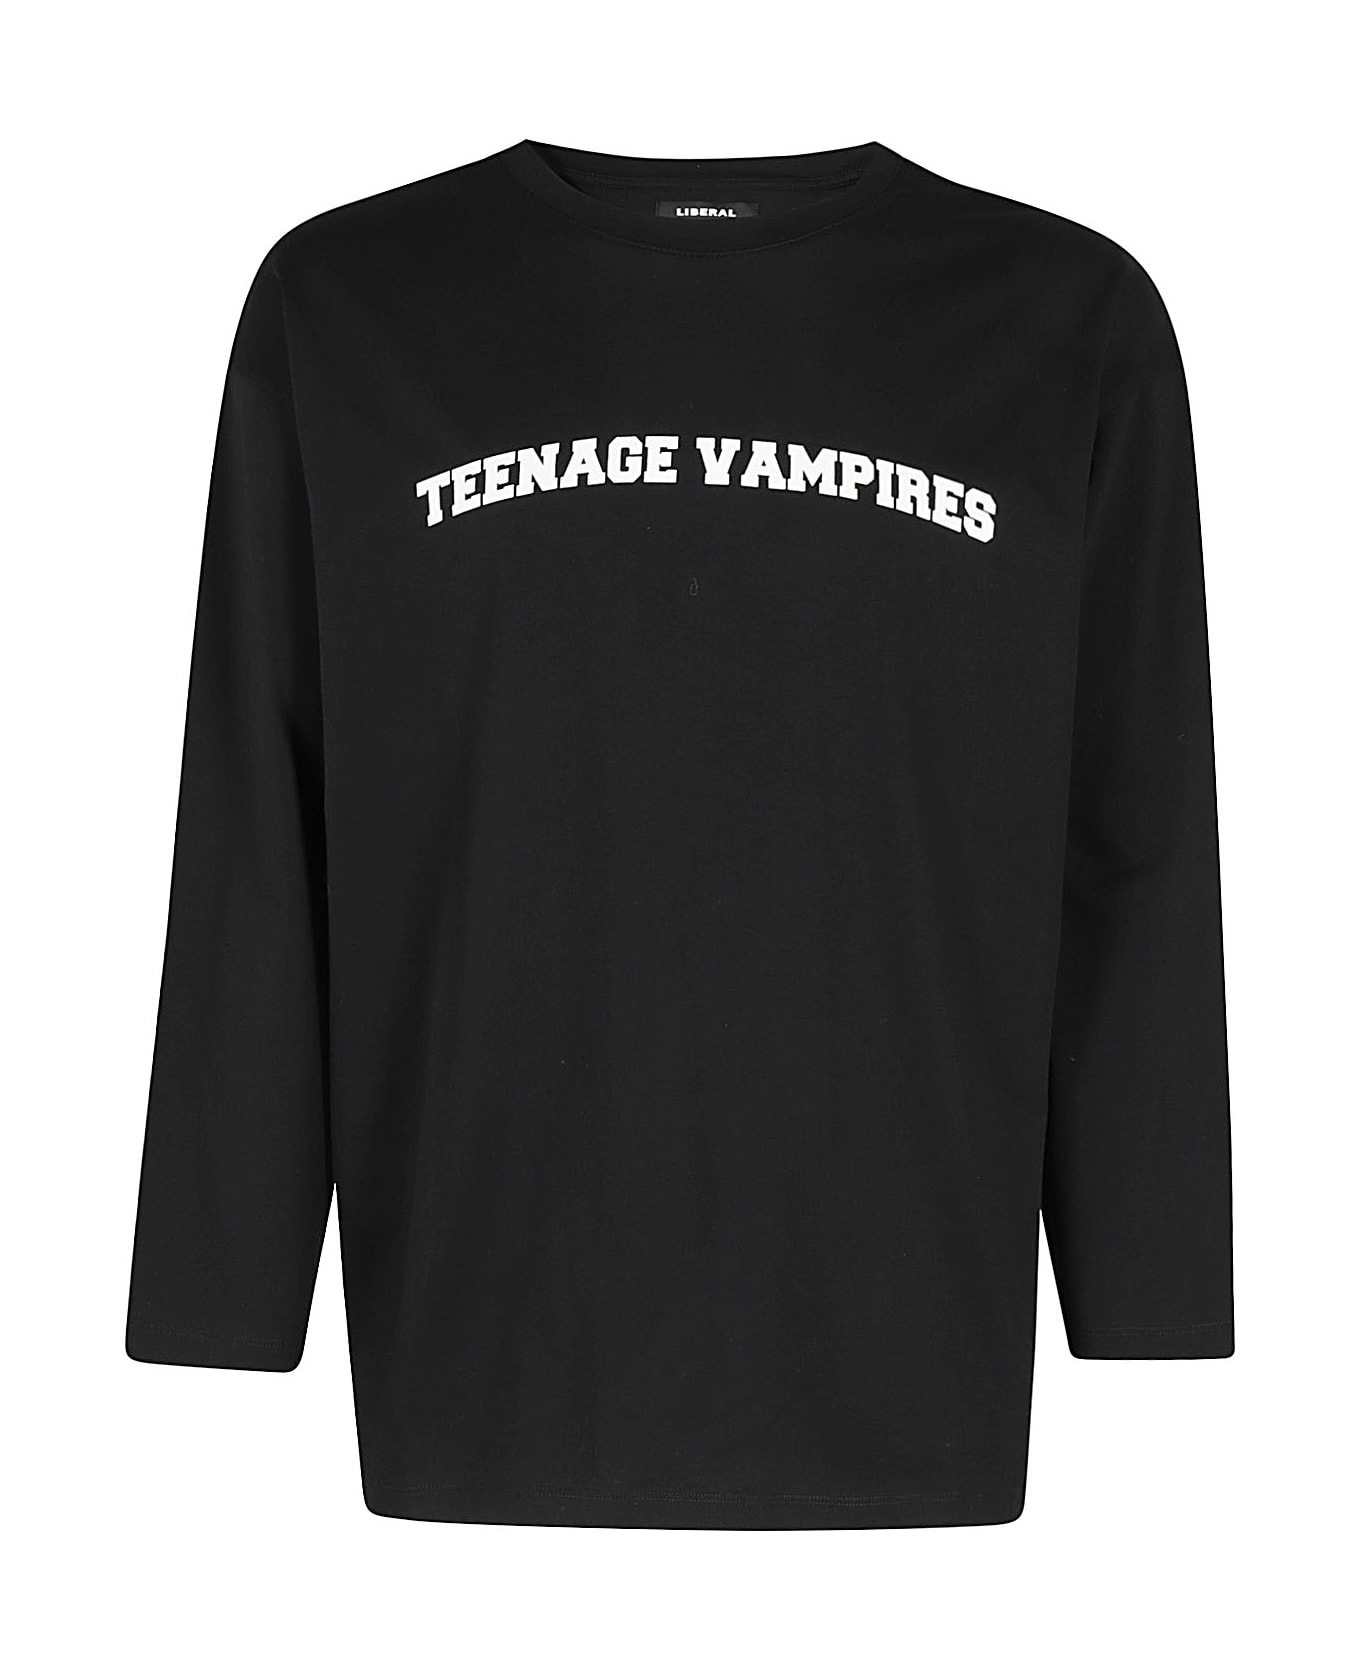 Liberal Youth Ministry Teenage Vampires シャツ